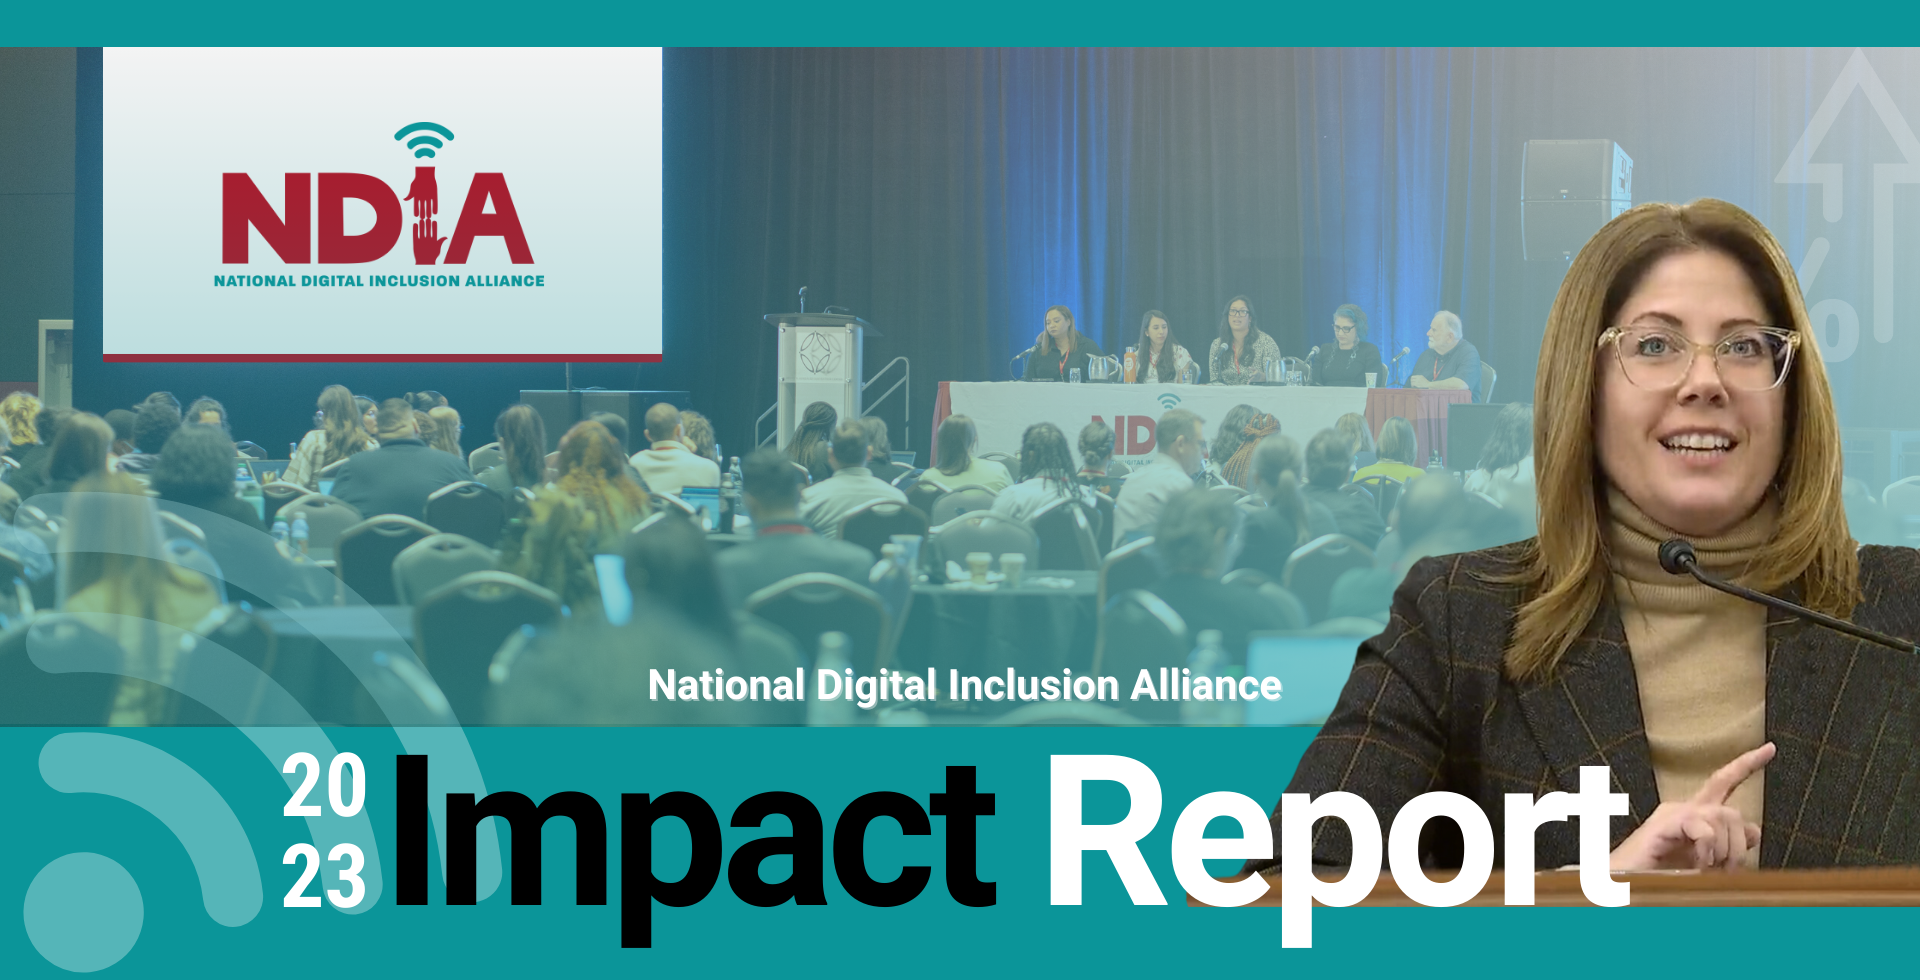 graphic shows the back of a crowd of people facing 5 speakers at a table on a stage. In the foreground: A woman in a brown suit with glasses, NDIA Logo, and 2023 Impact Report